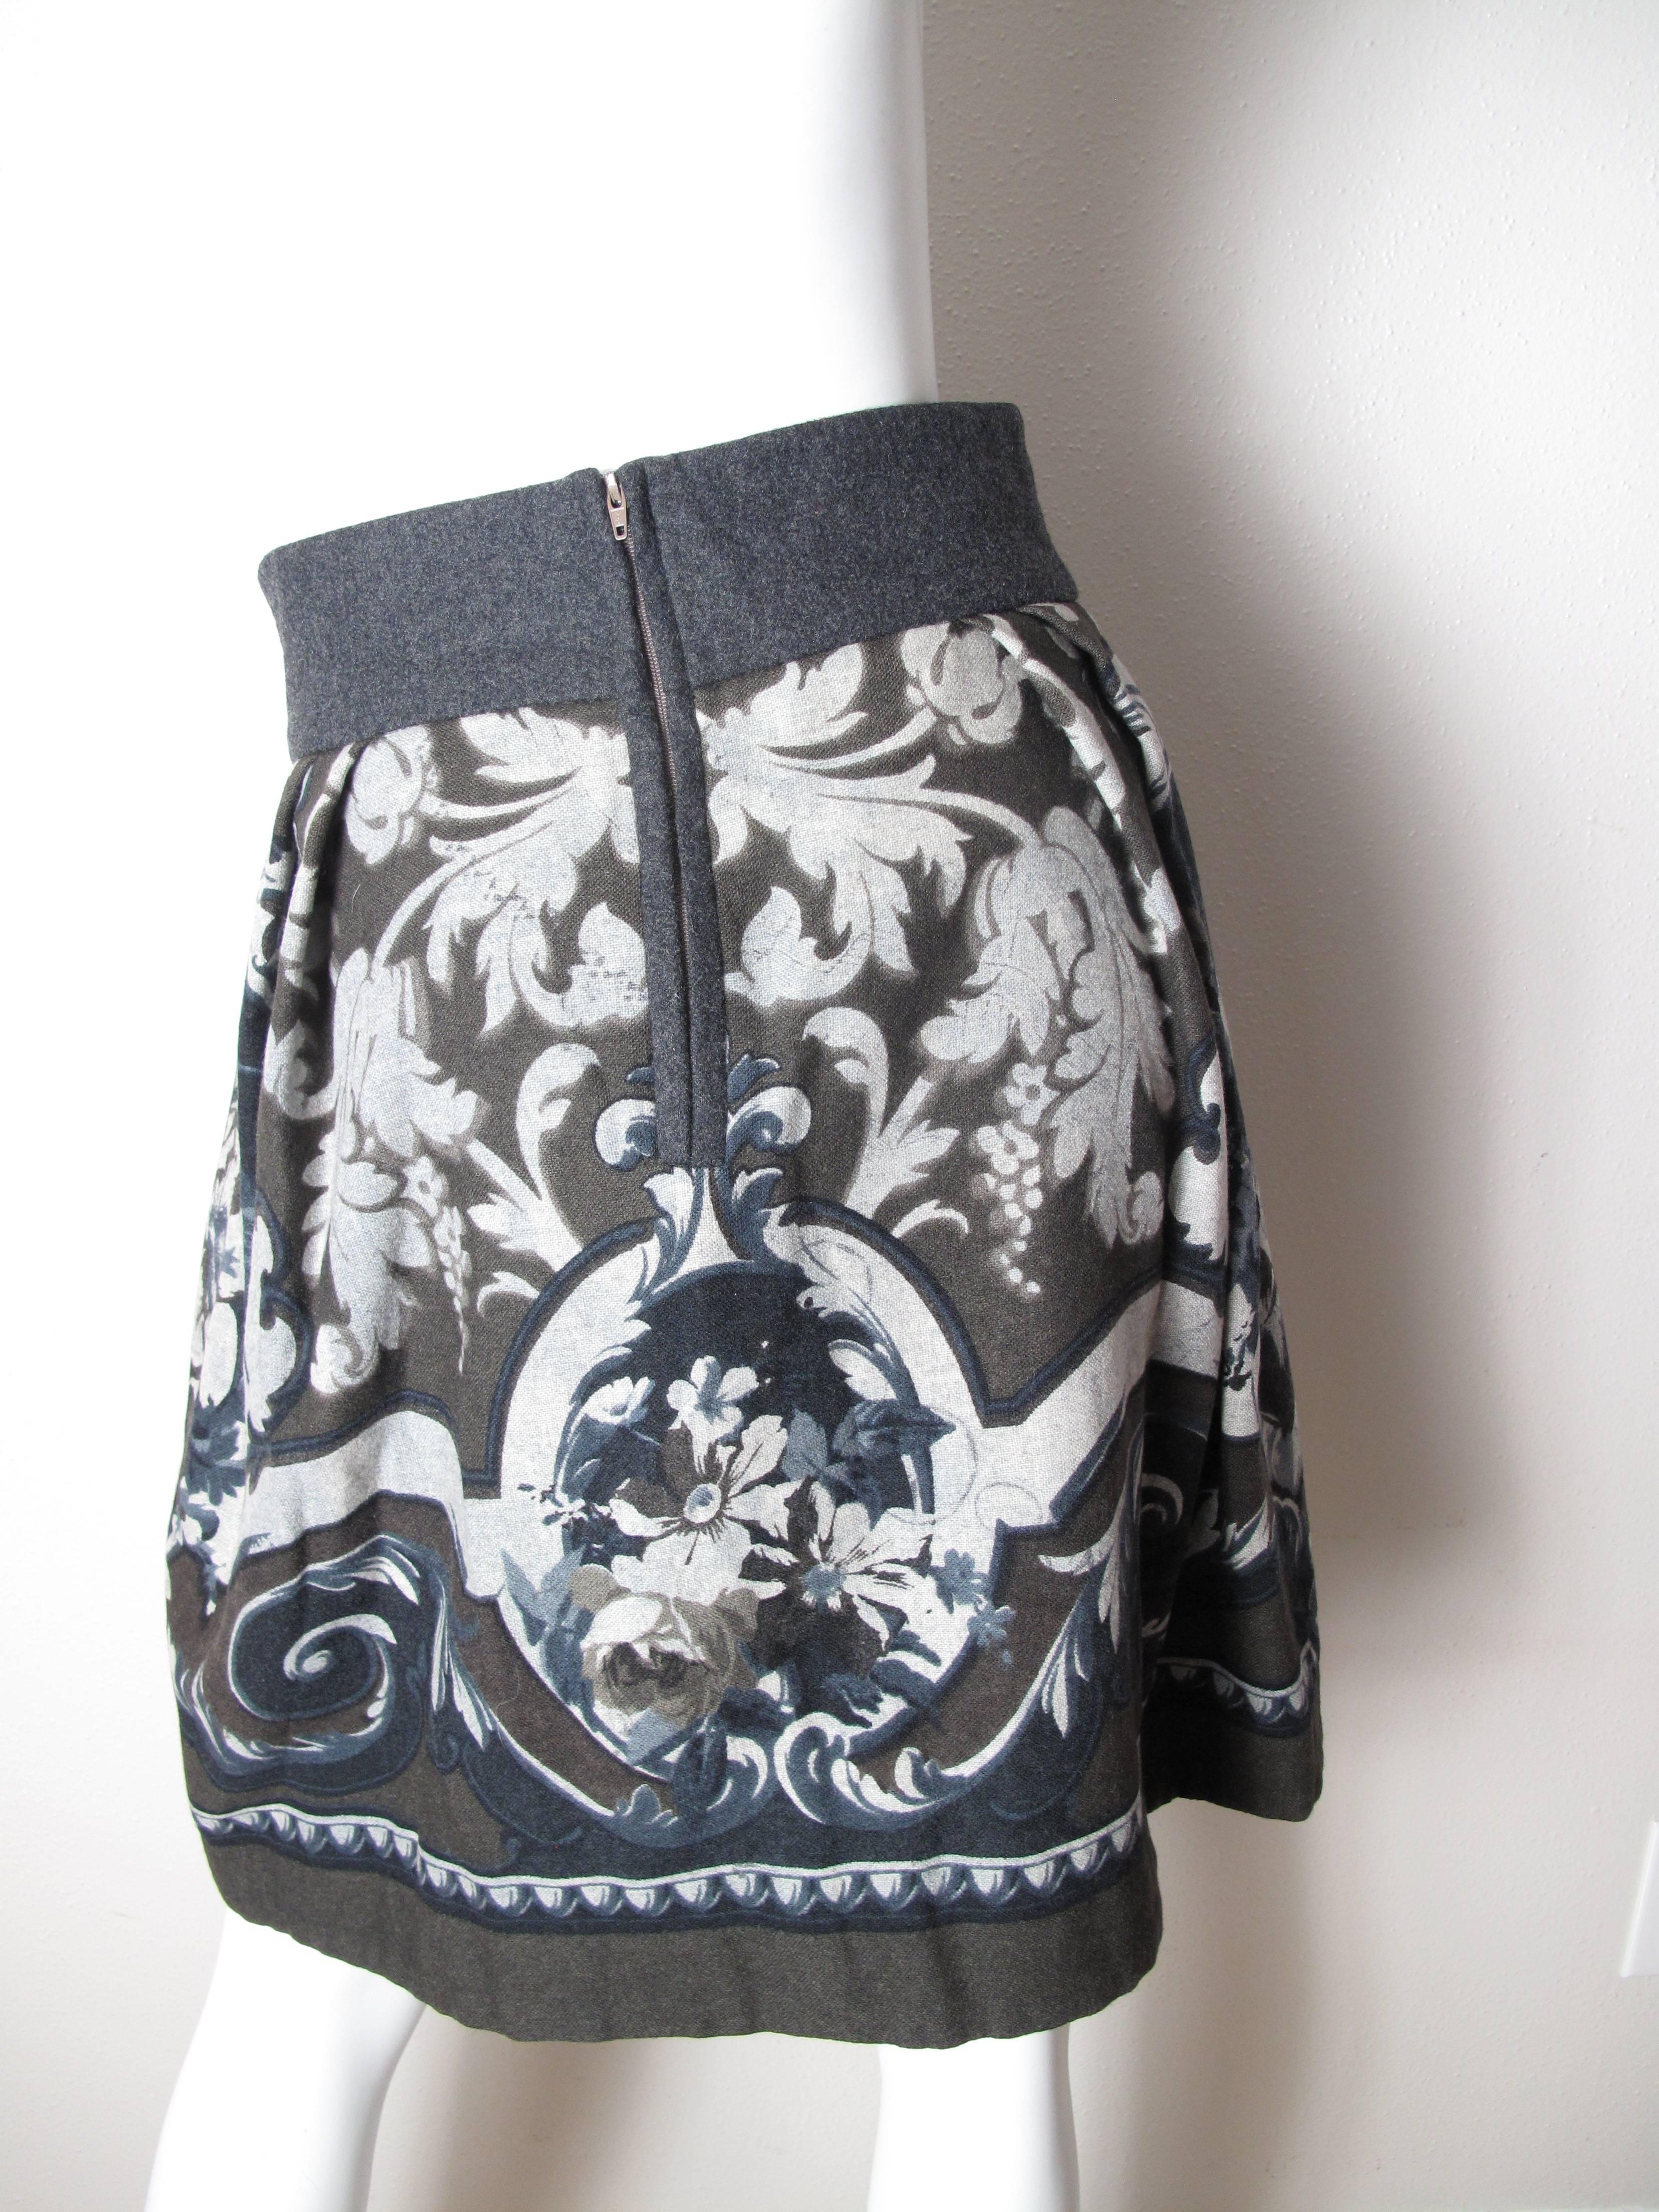 Byblos wool charcoal skirt with brown and grey print.  Opening in front. Condition: Excellent.  Size 40 / US 6

We accept returns for refund, please see our terms. We offer free ground shipping within the US.  Please let us know if you have any